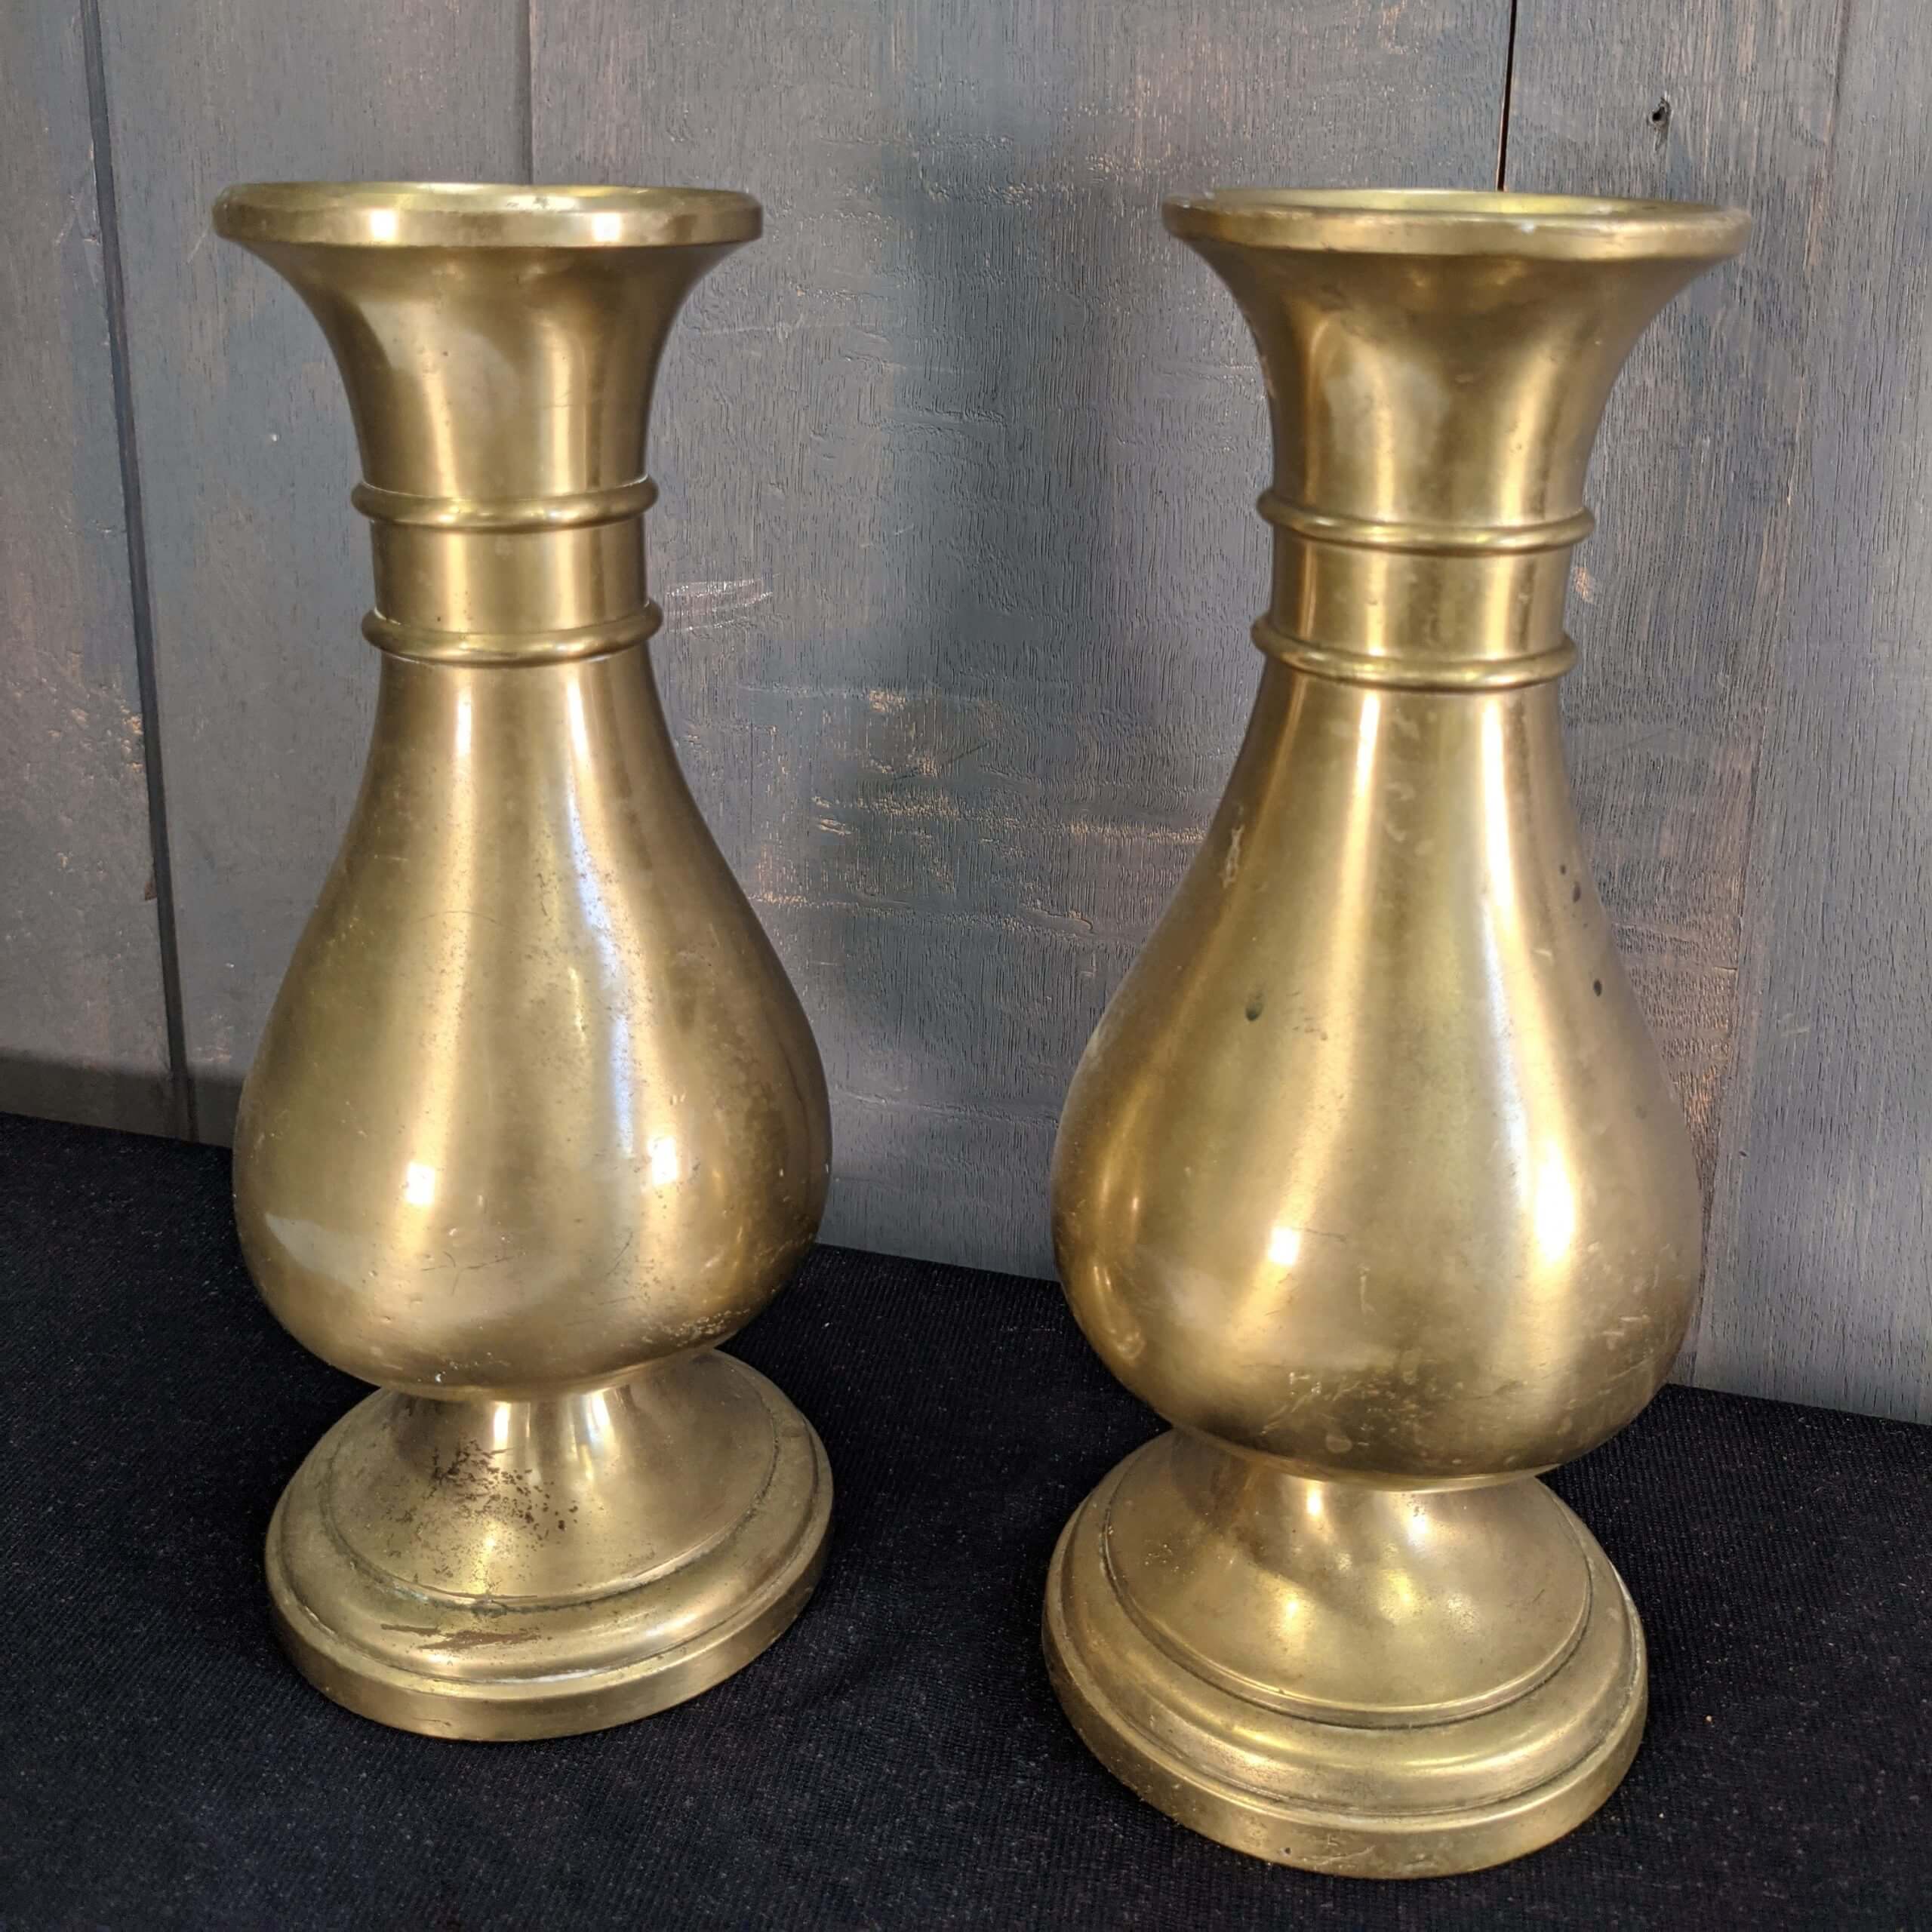 Large Pair Classic Brass Church Flower Vases (SOLD) - Antique Church  Furnishings